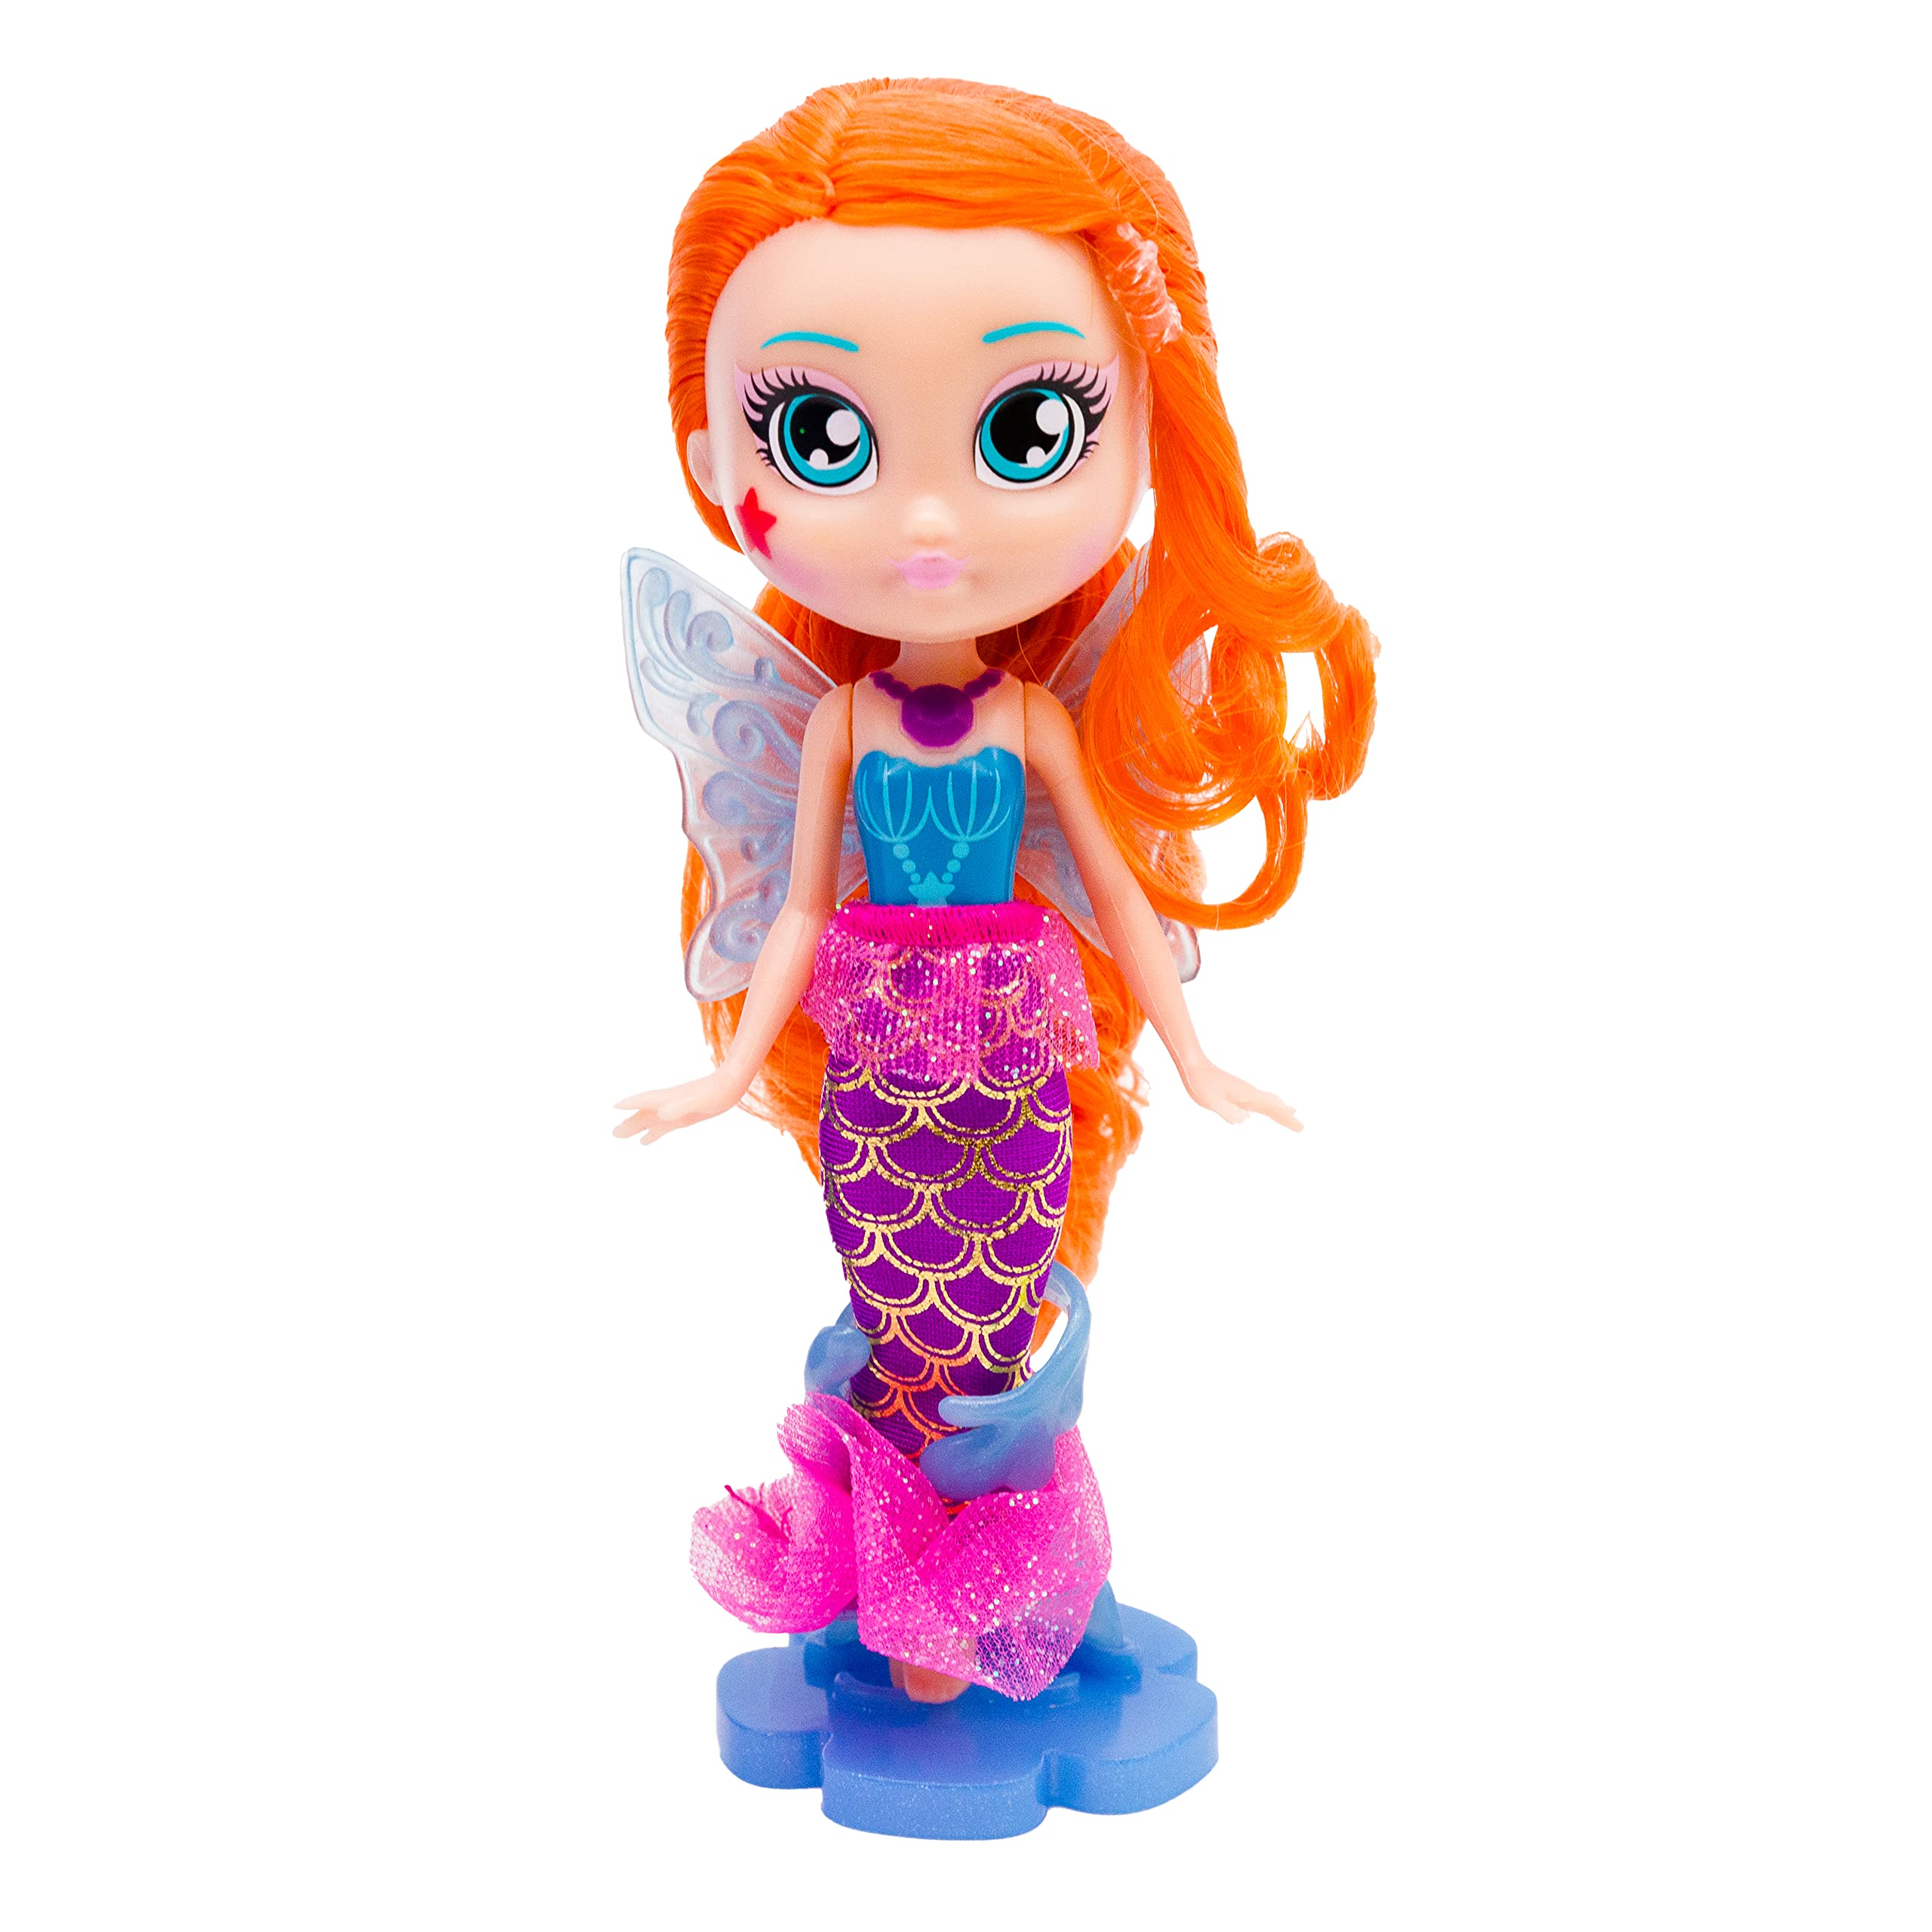 Bright Fairy Friends BFF Mermaid Doll with Color Change Wings, 4 Surprise Mermaid Accessories, Motion Activated Light up Jar, Ideal Nightlight for Kids, Gifts for Kids 3 Years and Older